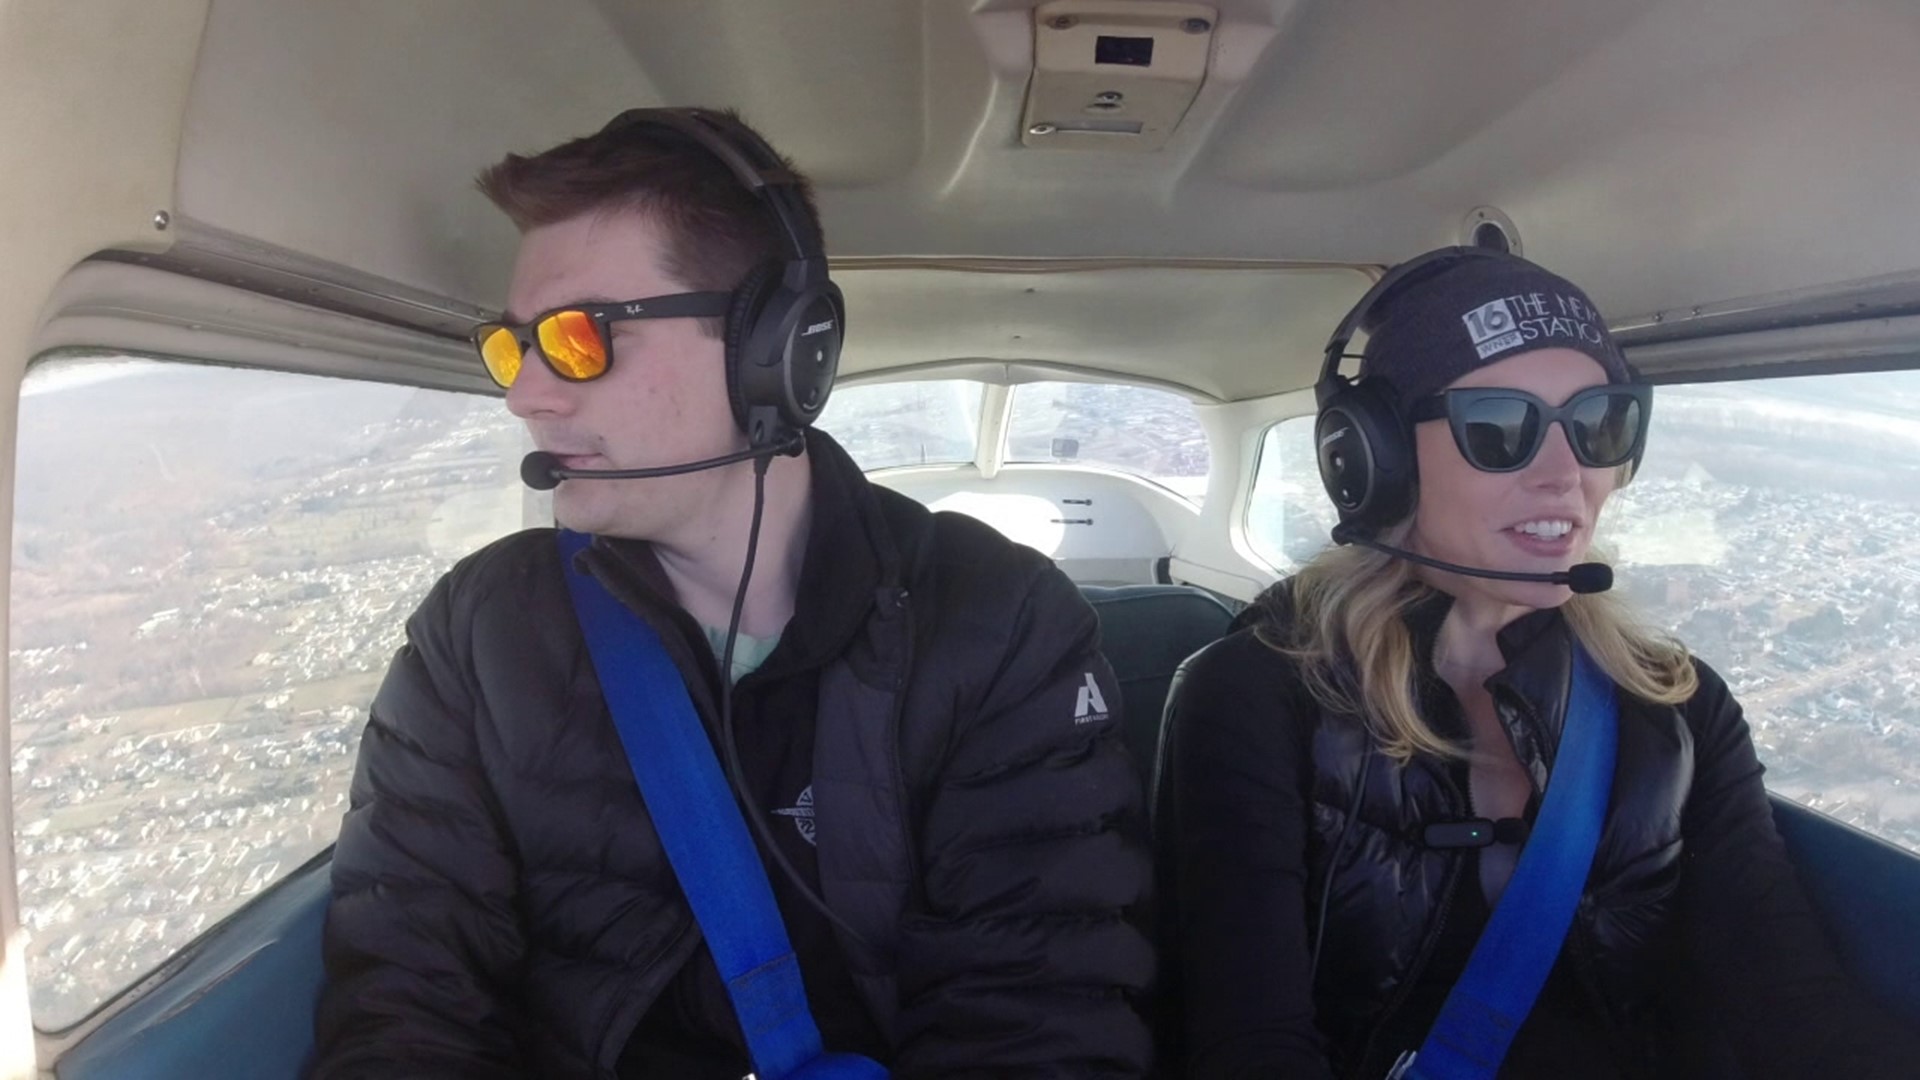 If flight lessons are on your bucket list, Newswatch 16's Chelsea Strub shows you where you can start in Luzerne County.